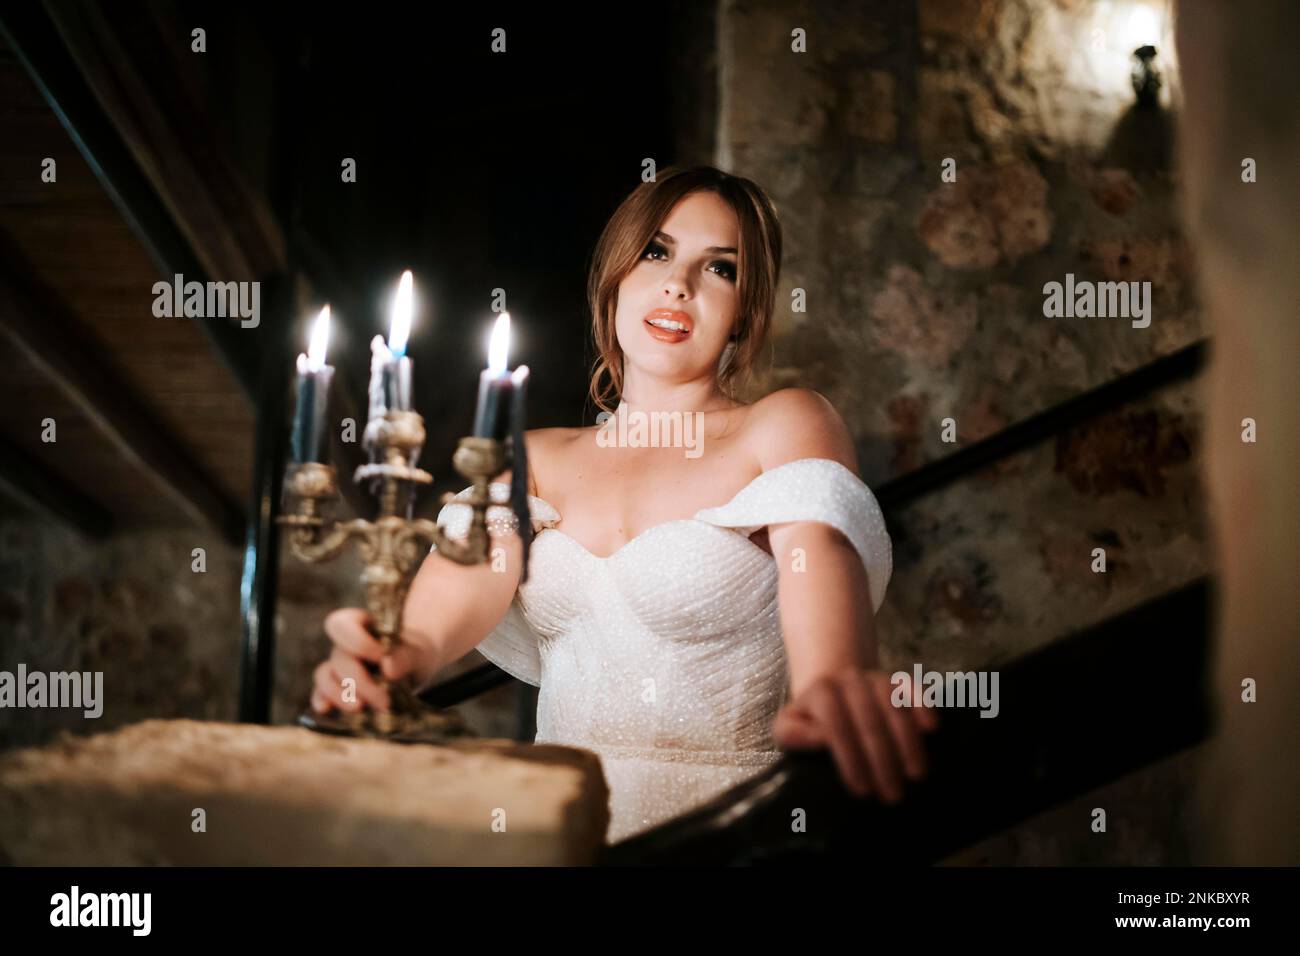 Portrait of beautiful bride holding candle in old stone rustic interior at night Stock Photo